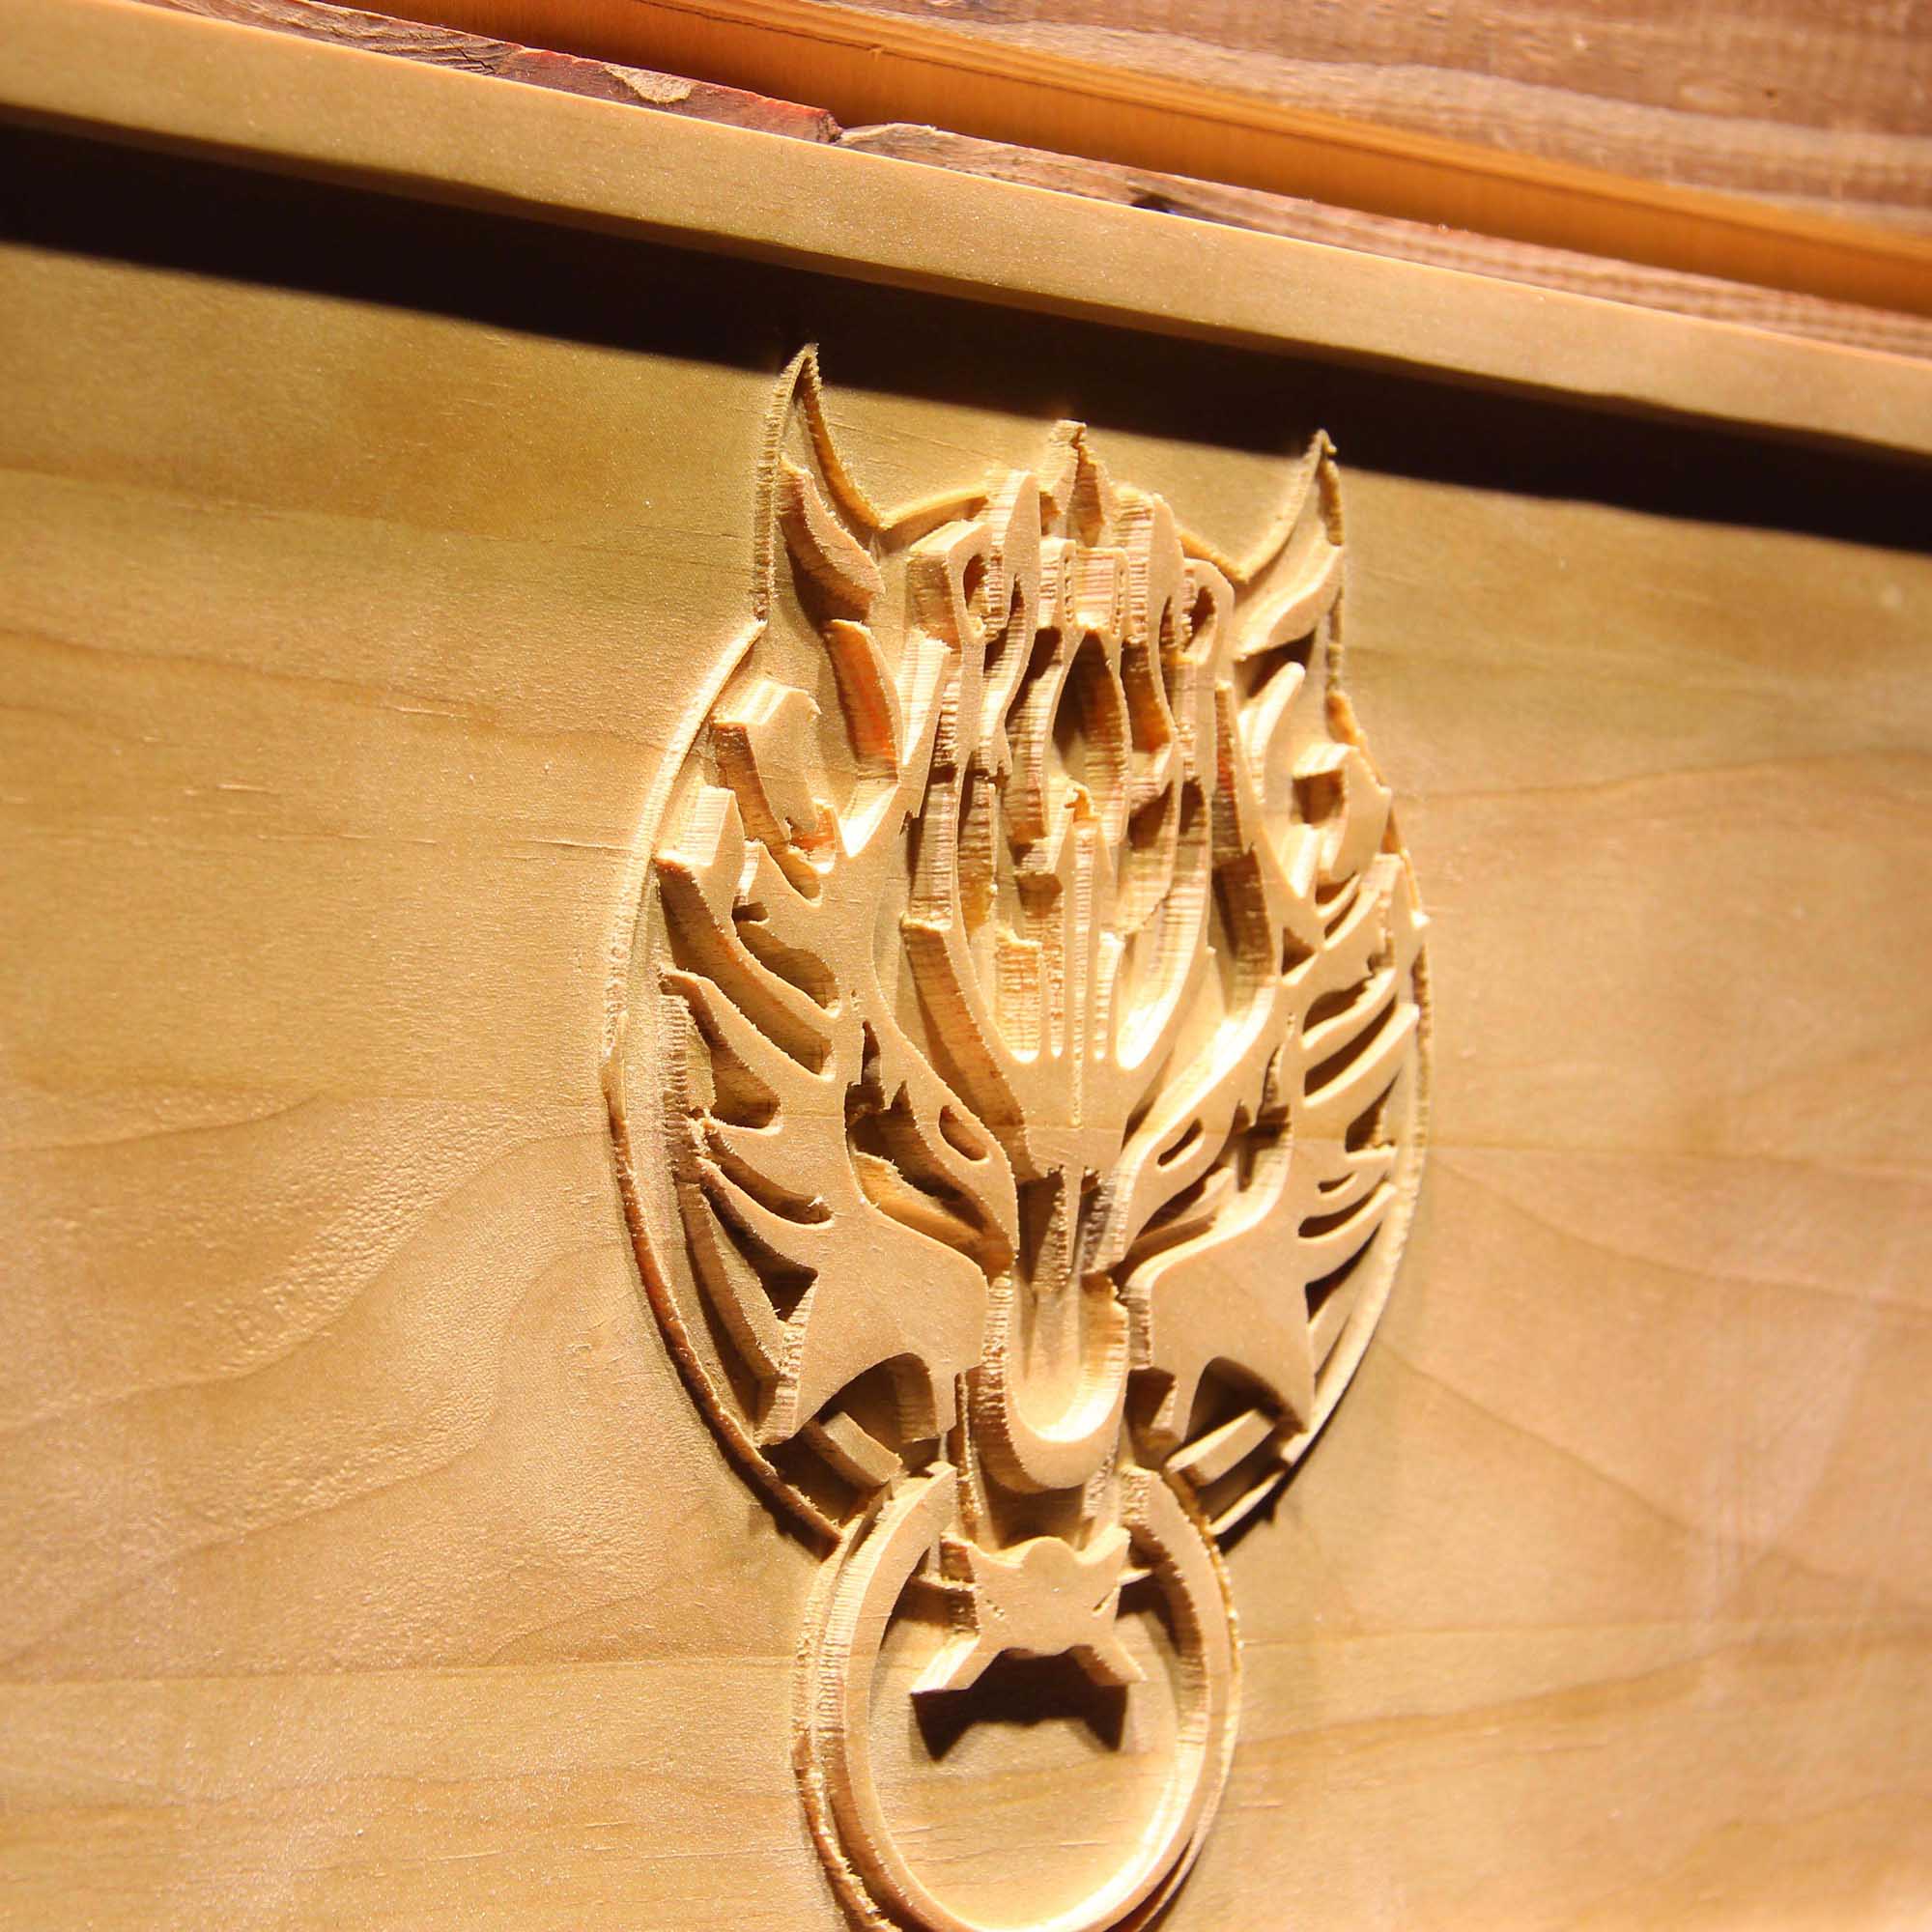 Final Fantasy VII 7 Cloudy Wolf 3D Wooden Engrave Sign